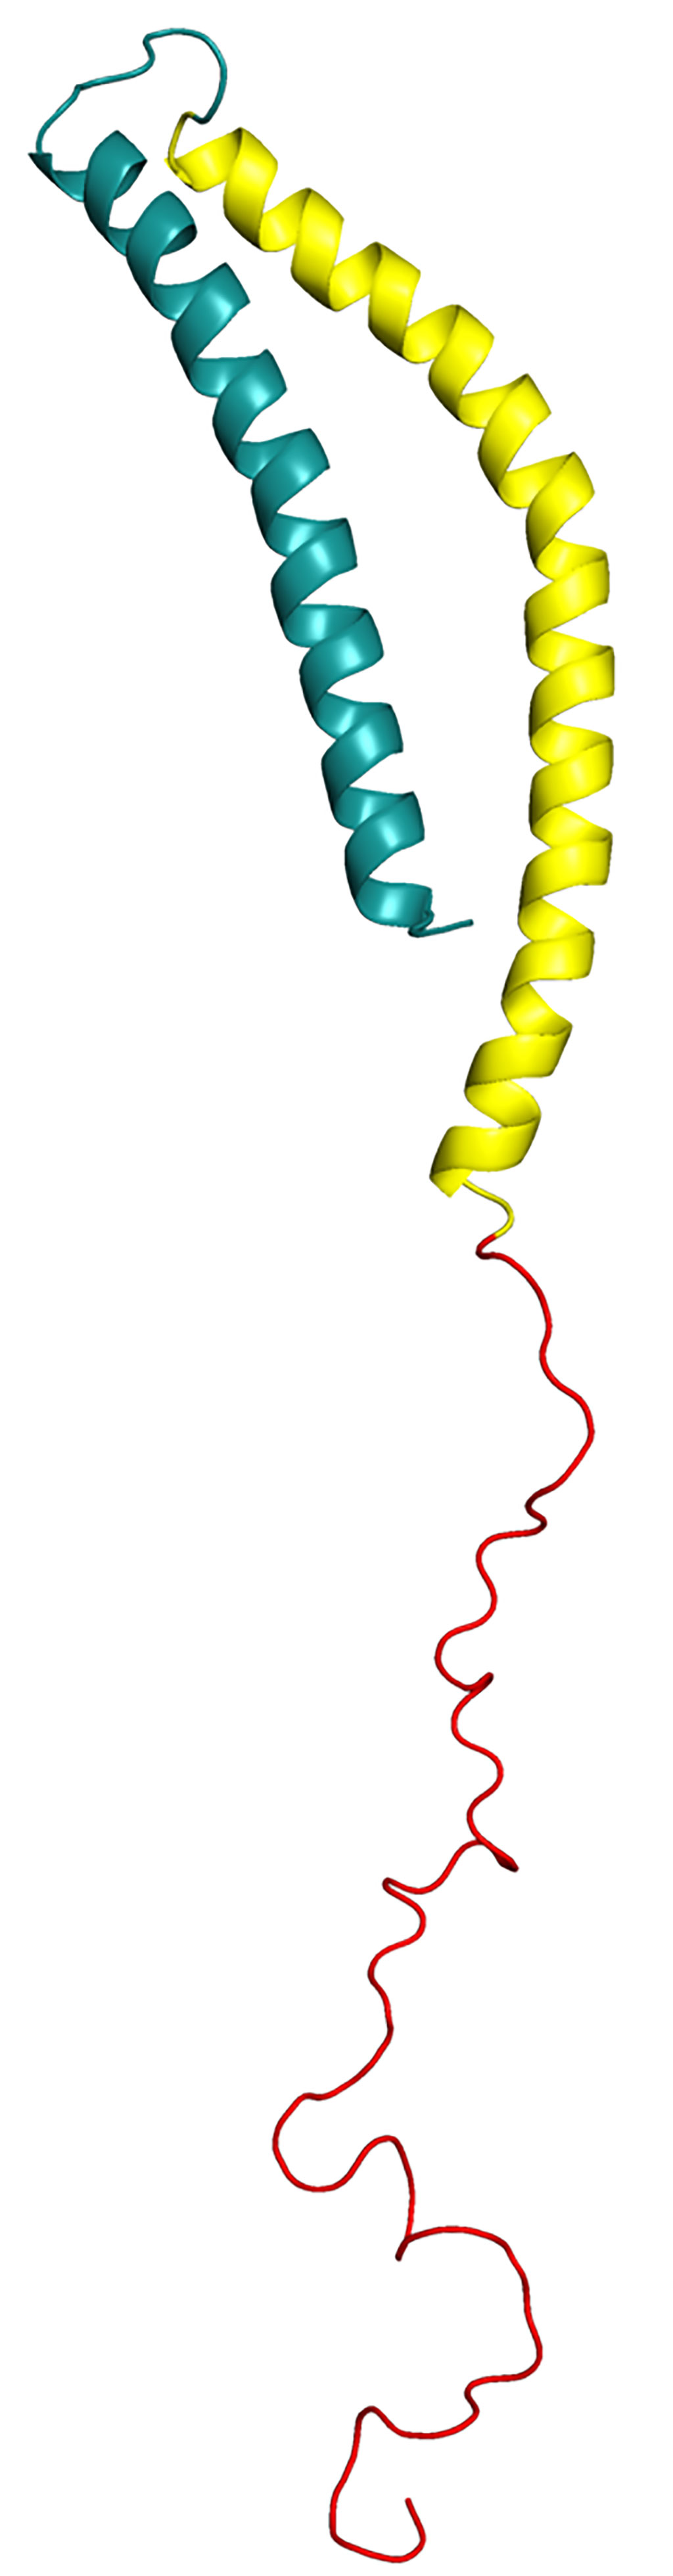 Image: A structural model of human alpha-synuclein protein (Photo courtesy of Wikimedia Commons)